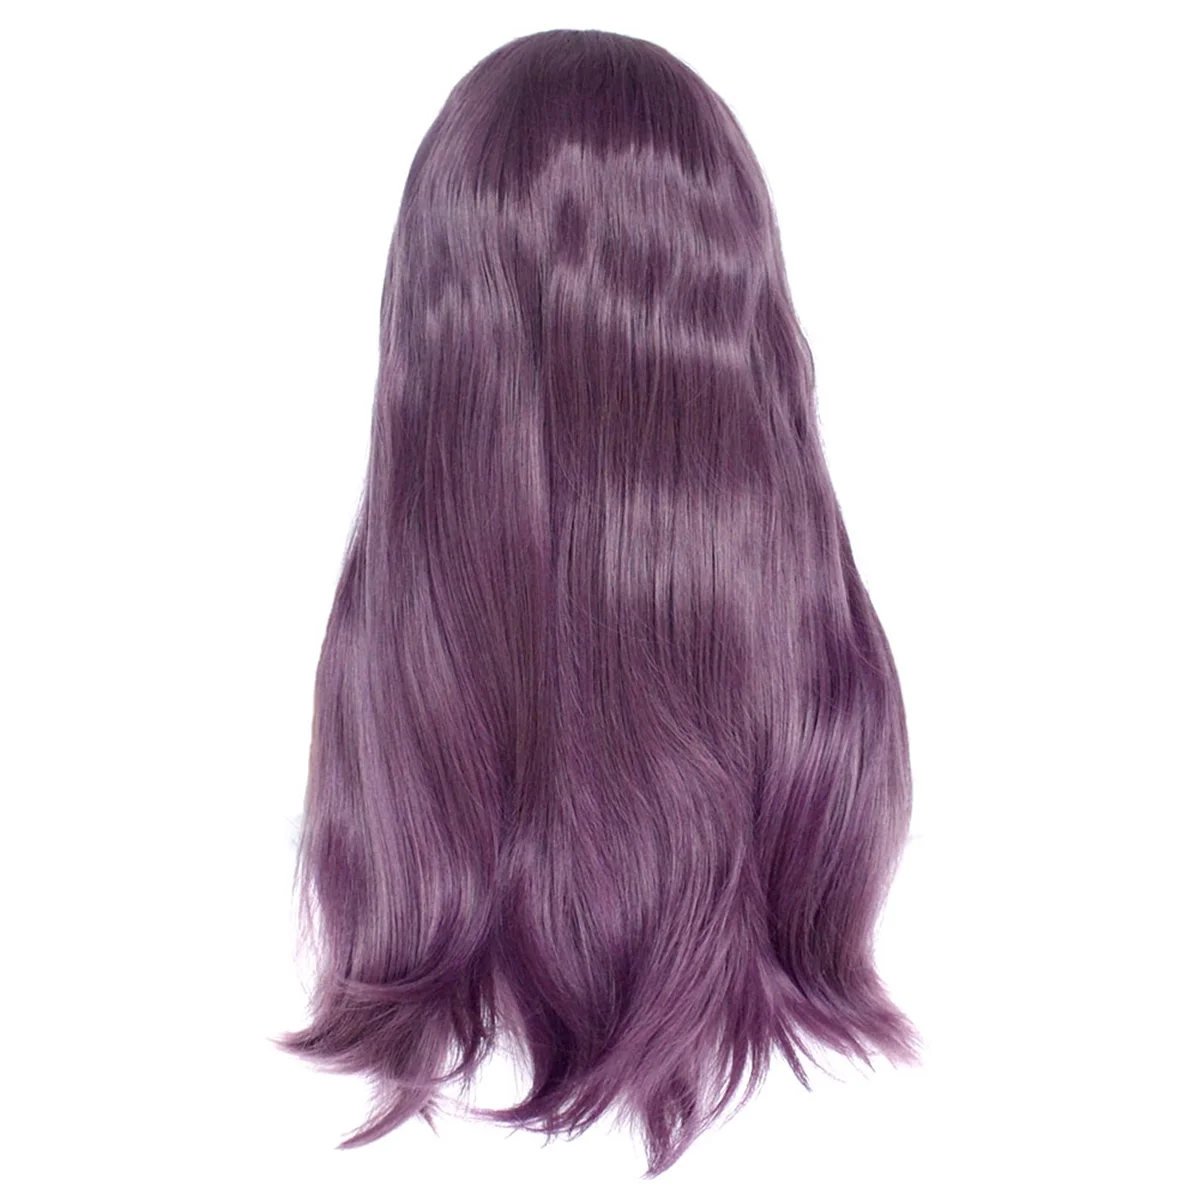 

24 Inches Front Lace Wig Synthetic Wig Long Wave Purple Wigs for Women Cosplay Lolita-Party Natural Hair Heat Resistant